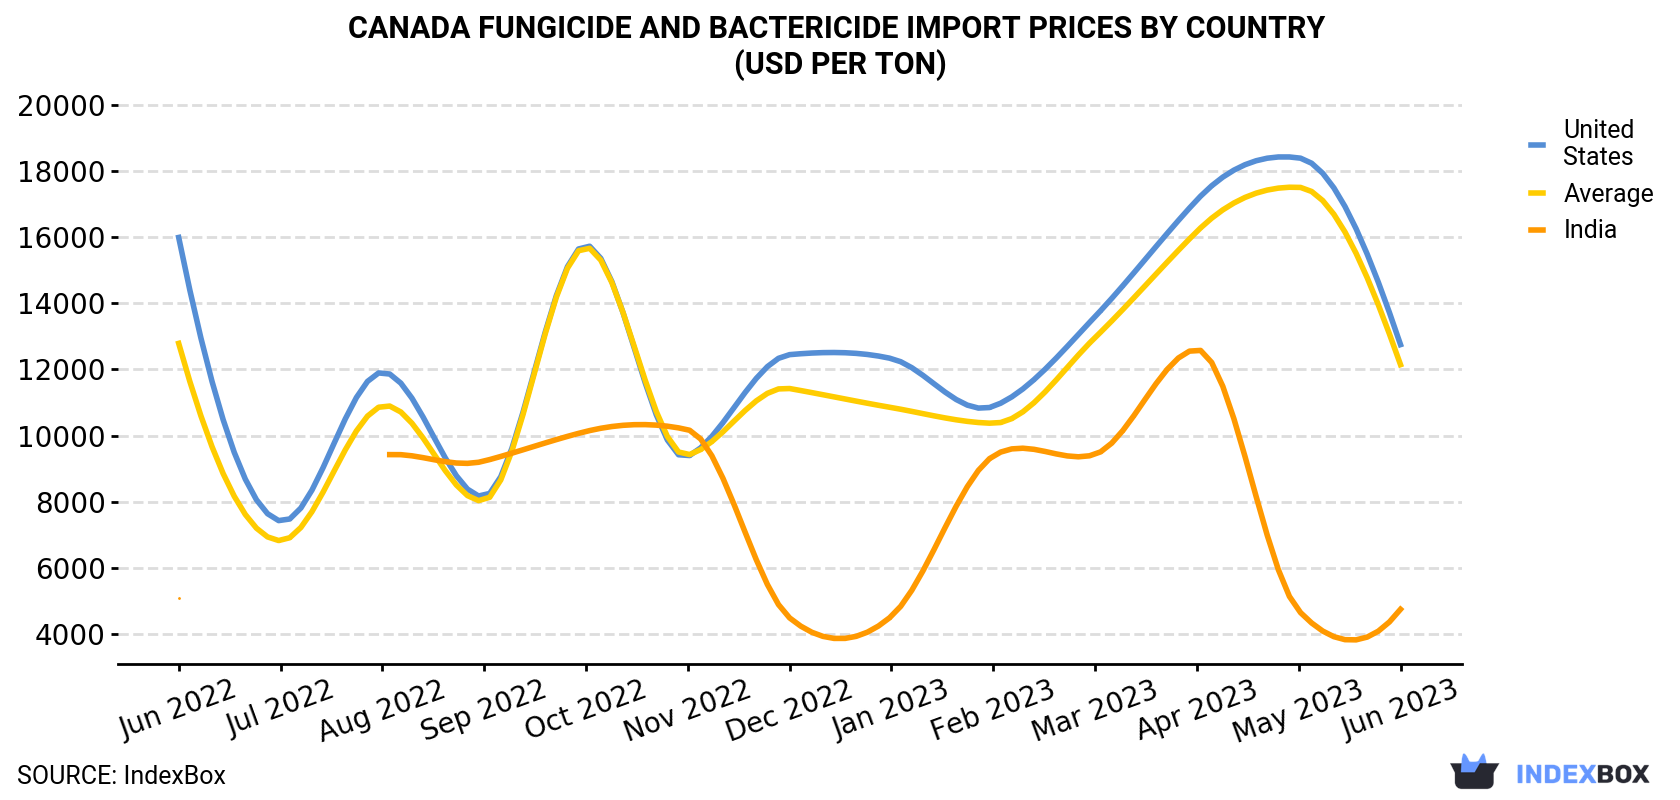 Canada Fungicide And Bactericide Import Prices By Country (USD Per Ton)